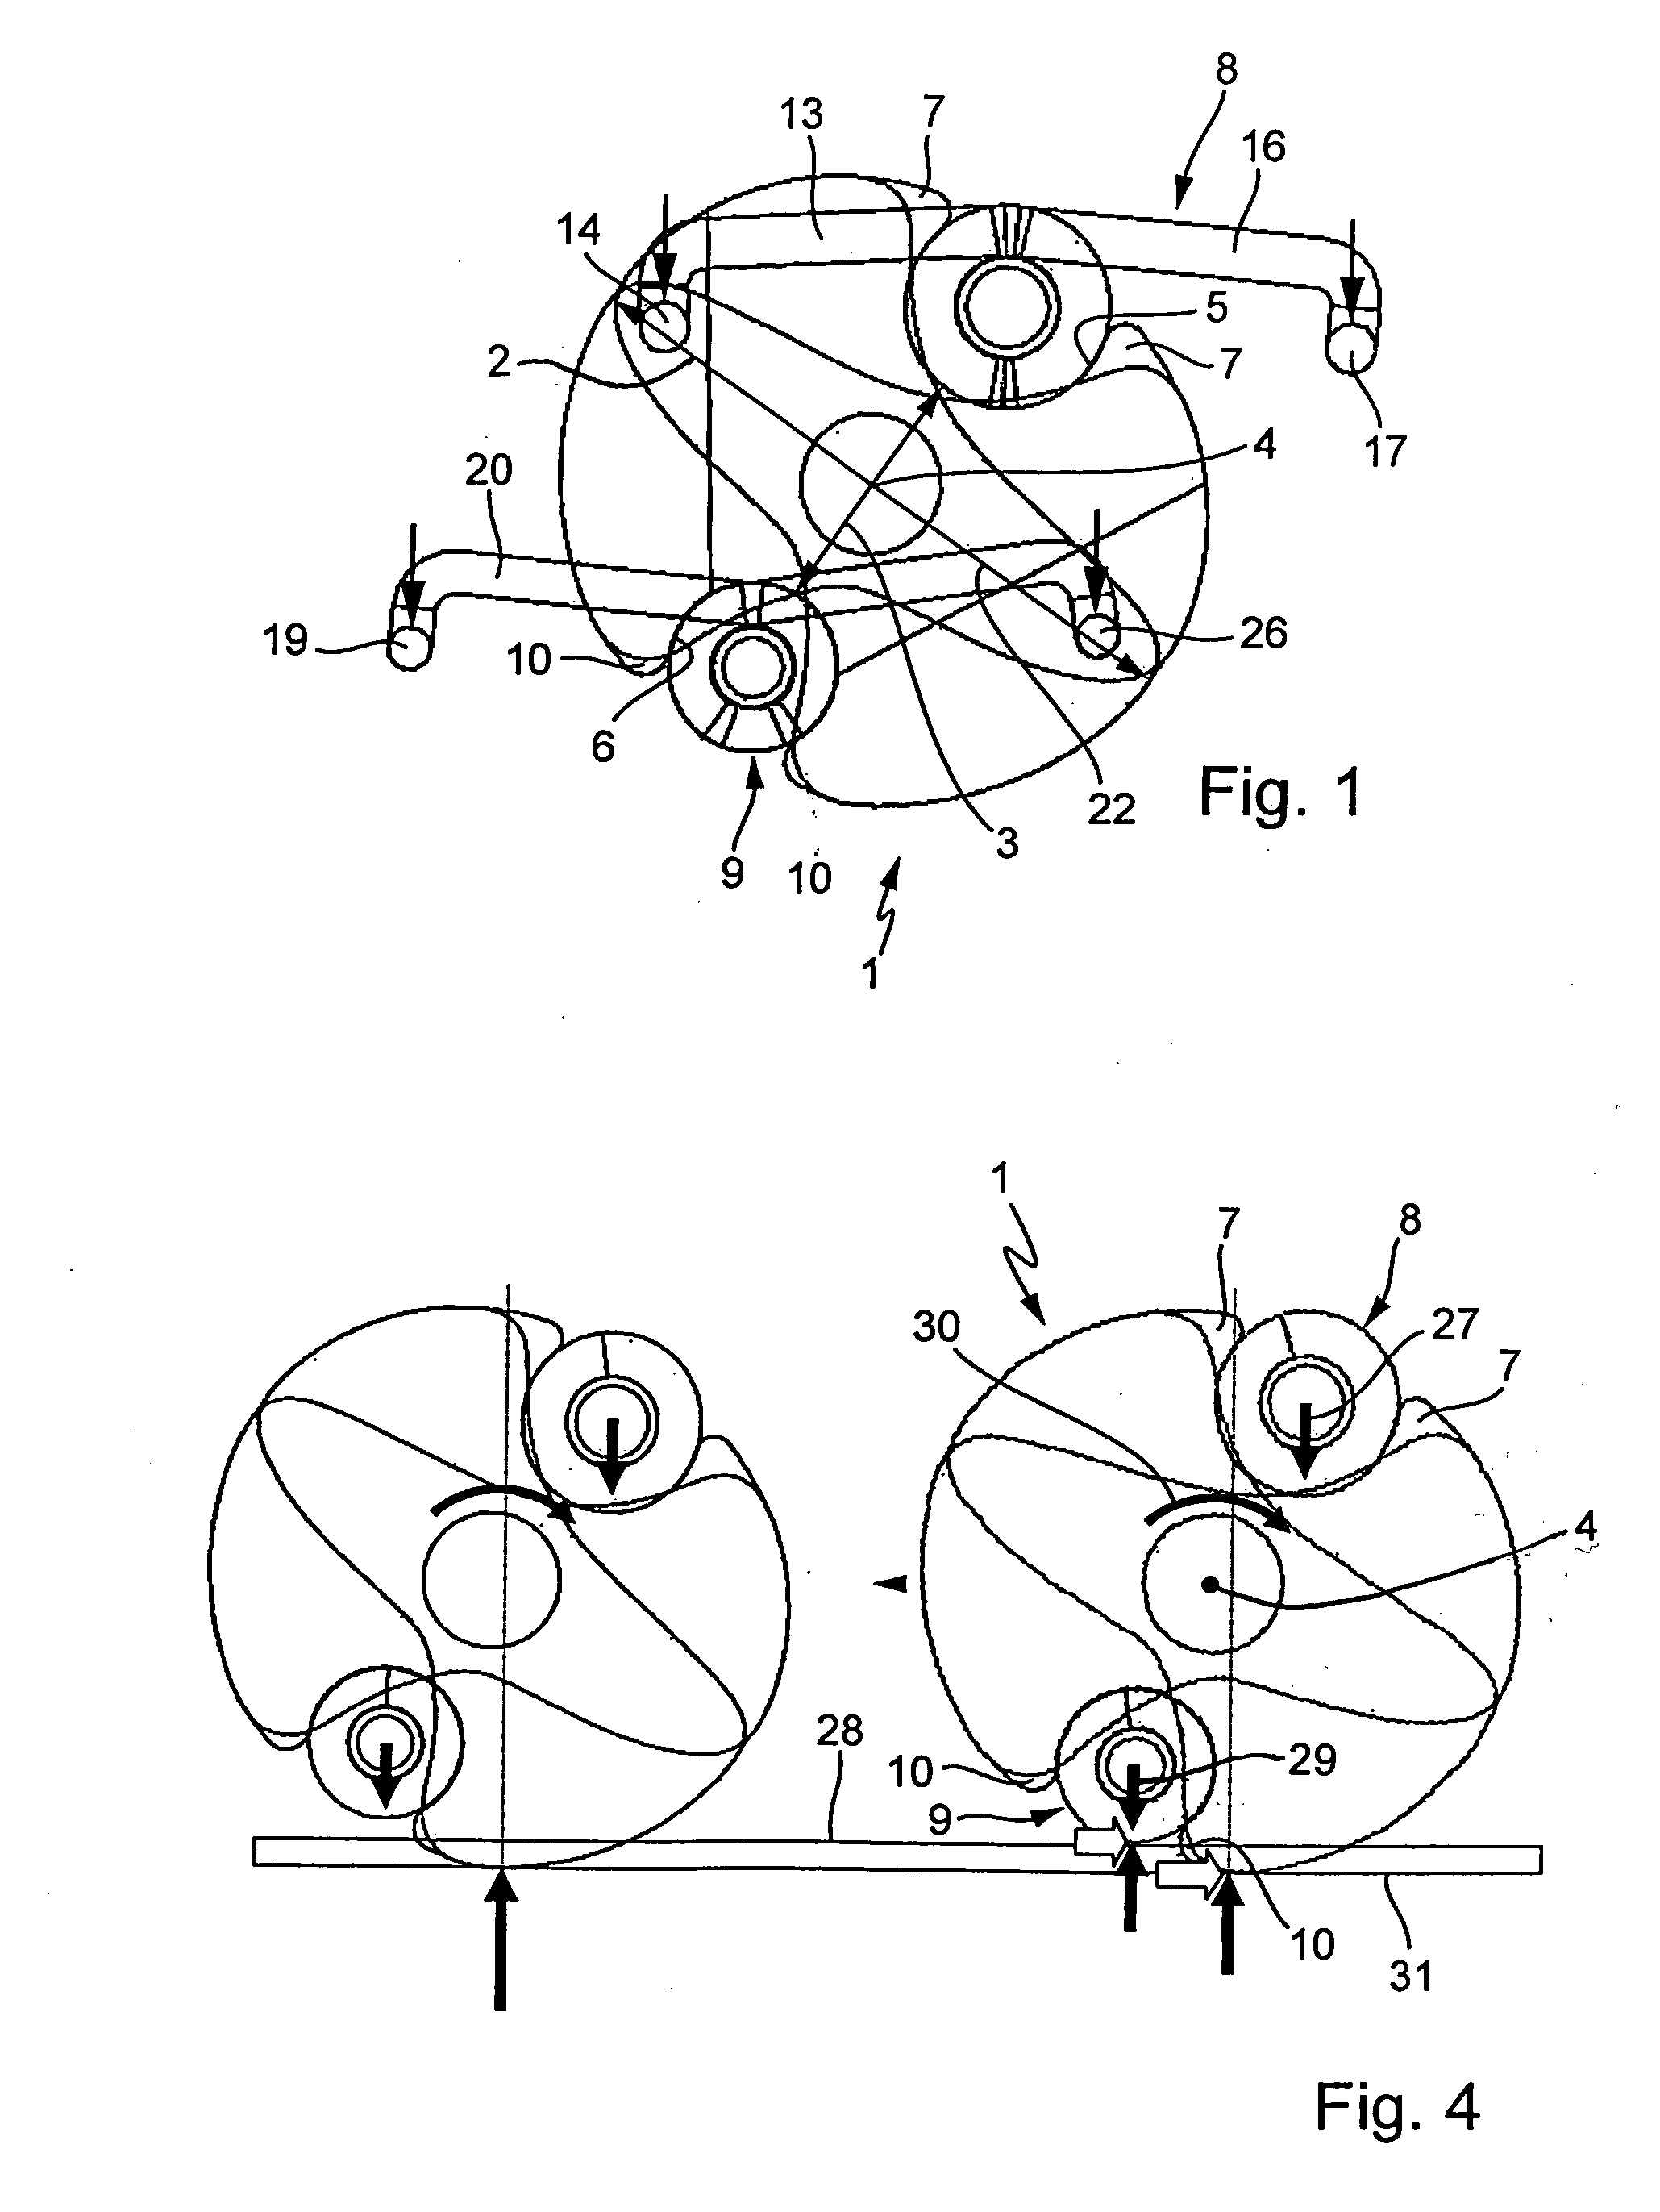 Switchable free-wheel arrangement for a transmission, particularly for a crank-CVT of a motor vehicle